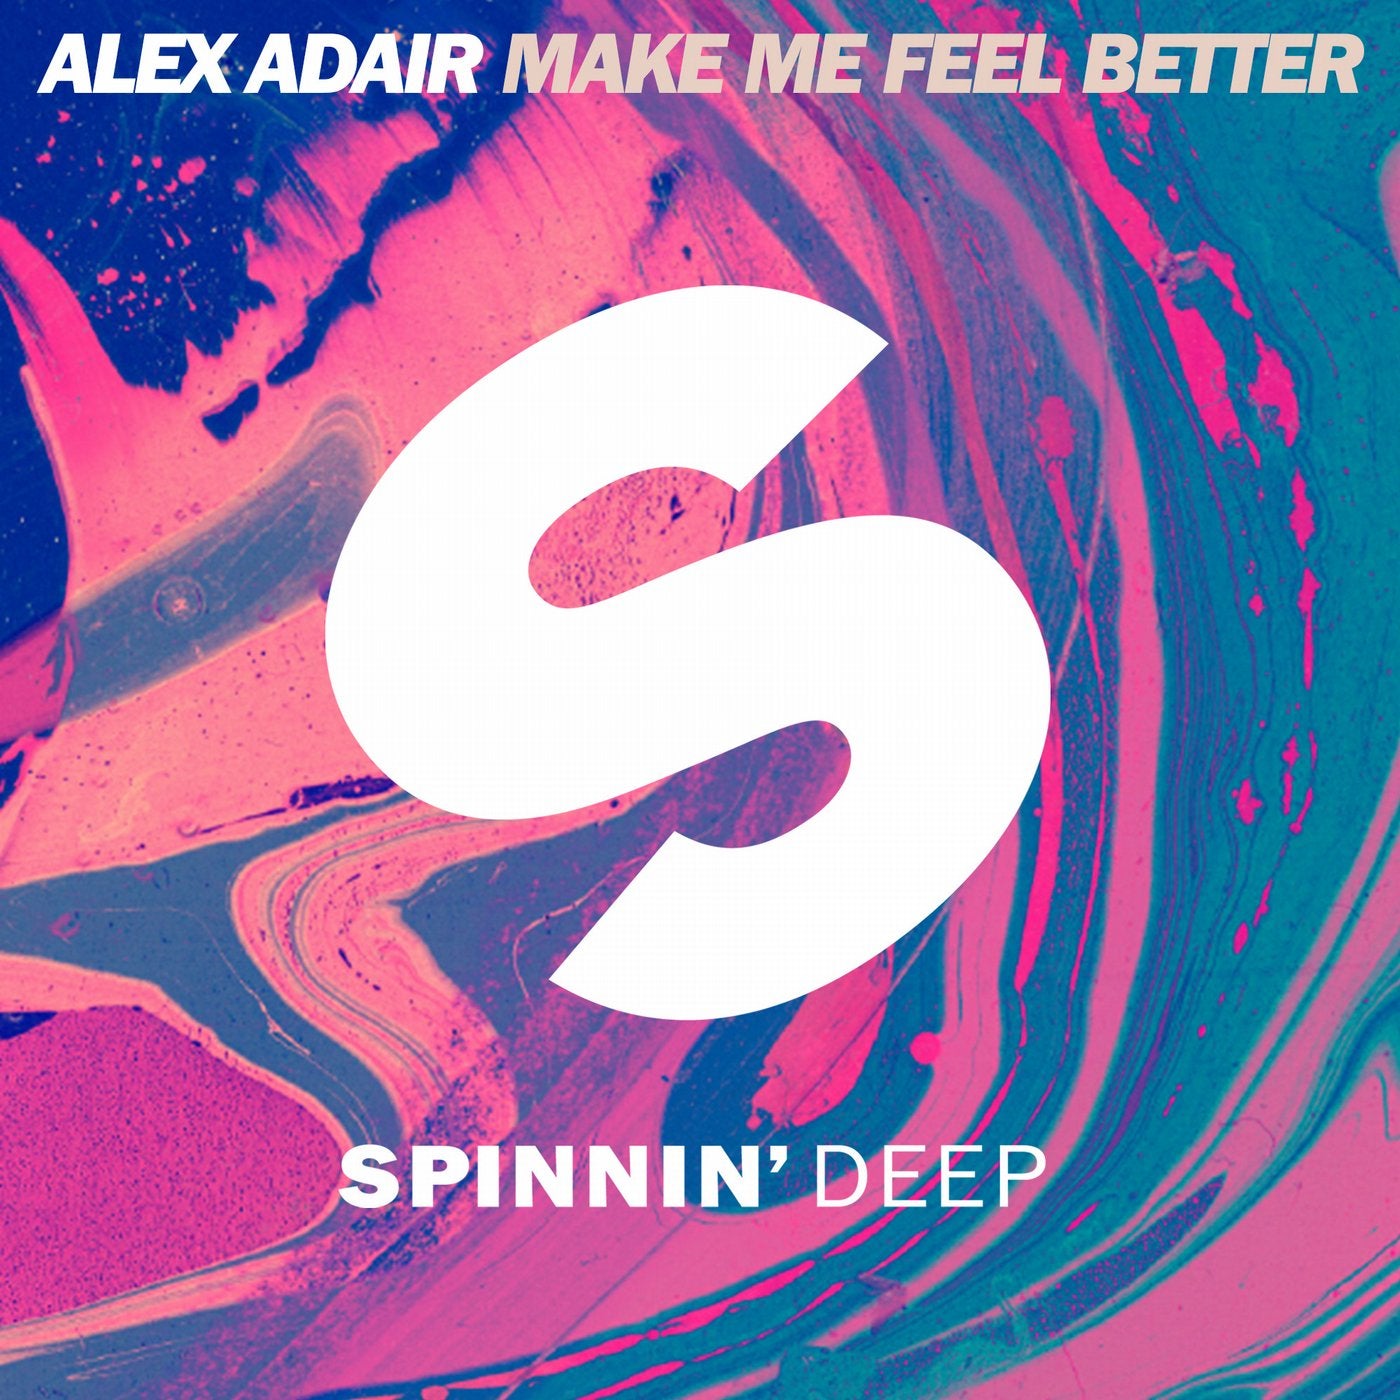 With her i feel better. Spinnin records. Alex Adair. Alex Adair make me feel better. Spinnin Deep.